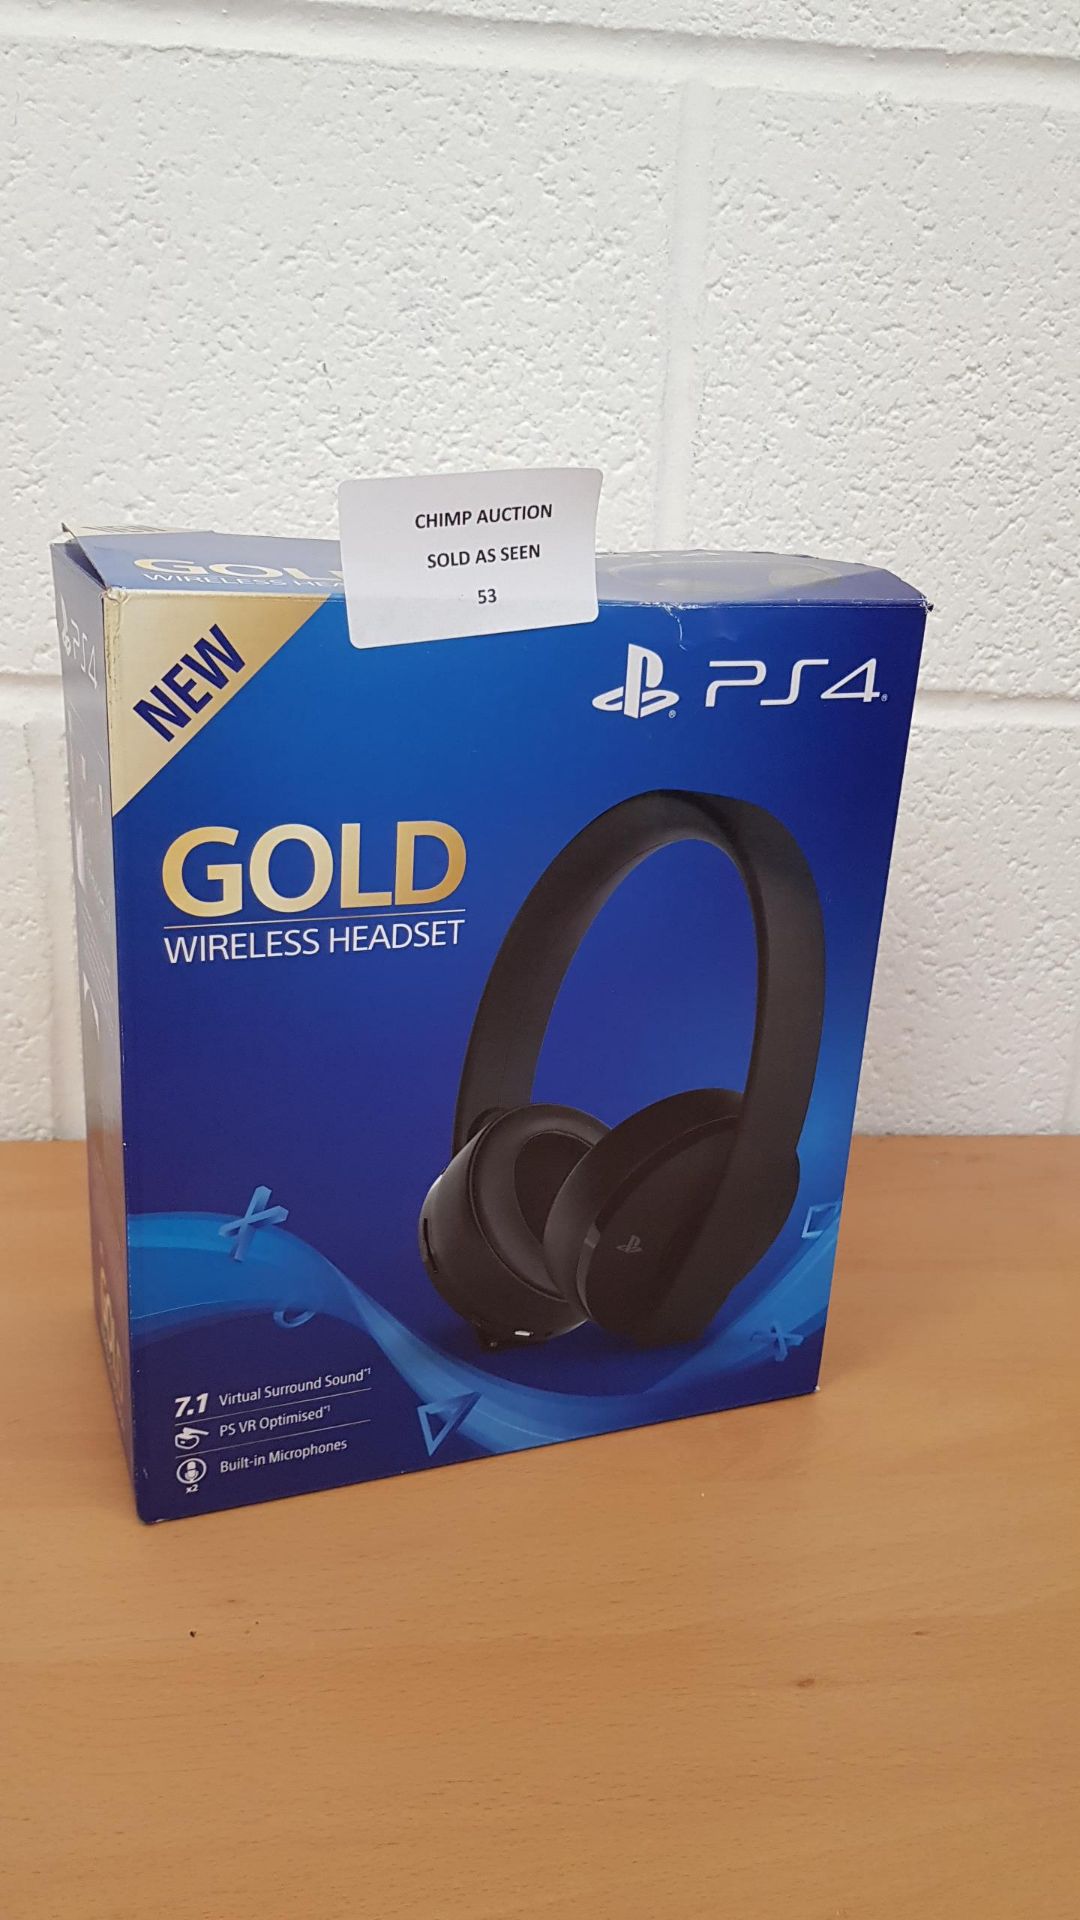 PlayStation 4 Gold 7.1 VR Sound Wireless Headset RRP £129.99.